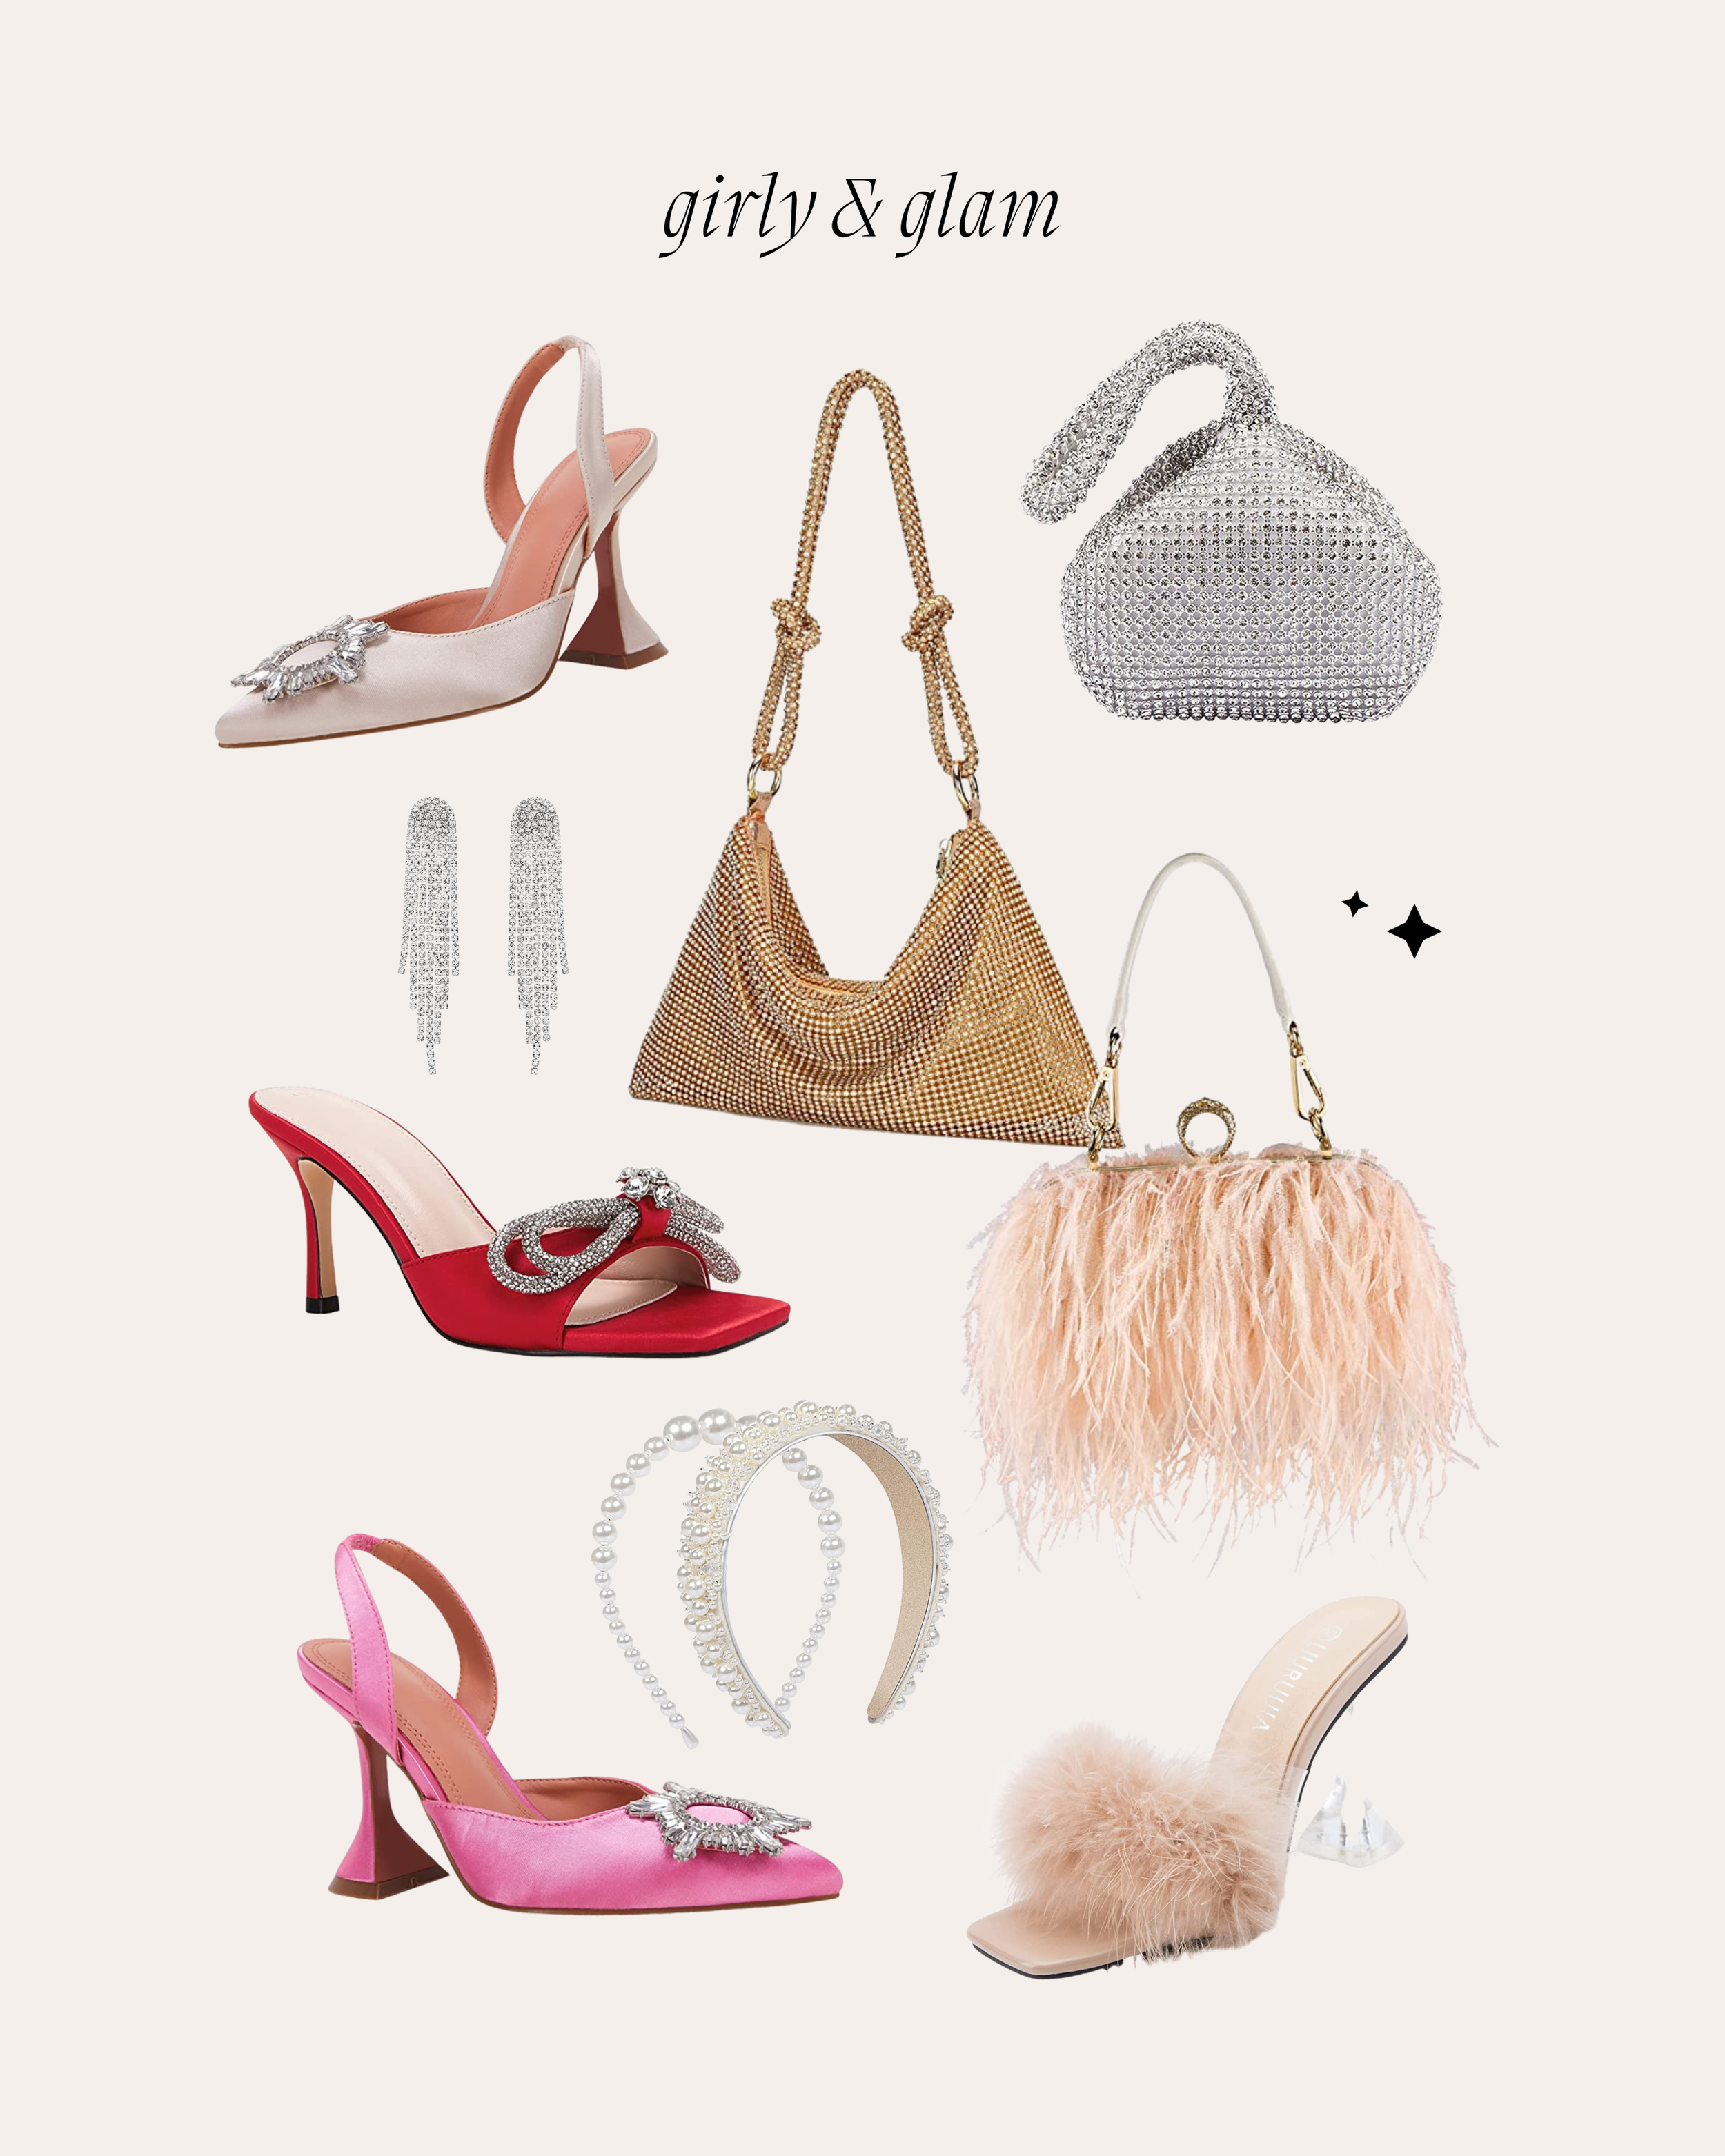 Accessories To Enhance Your Holiday Style - girly and glam - Bre Sheppard.png